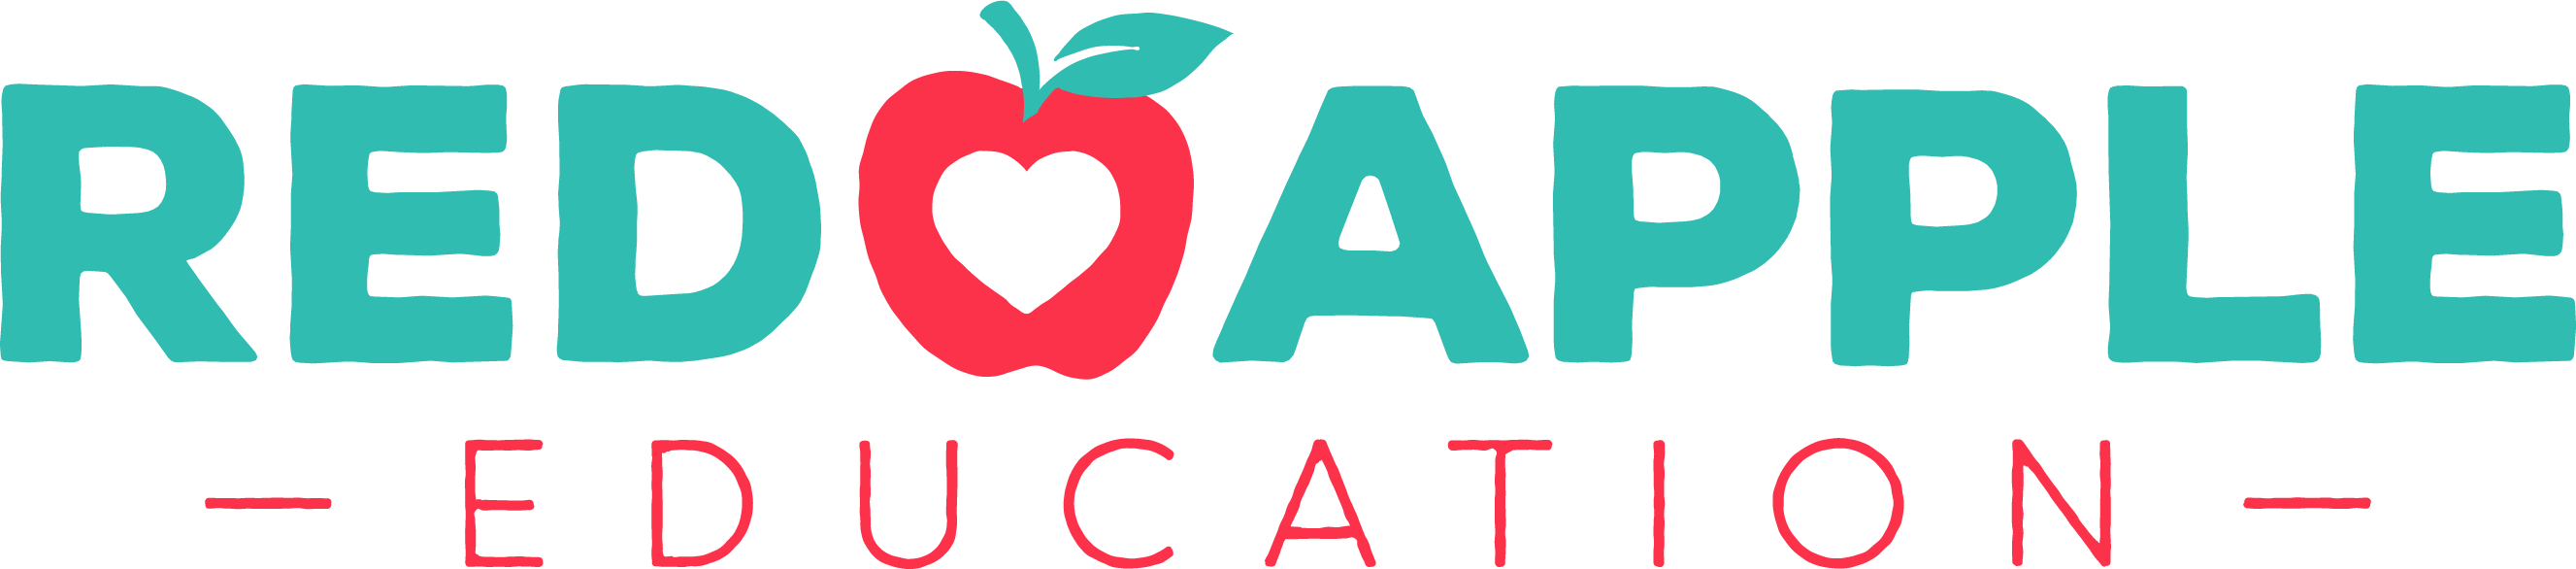 Red Apple Education Corporation